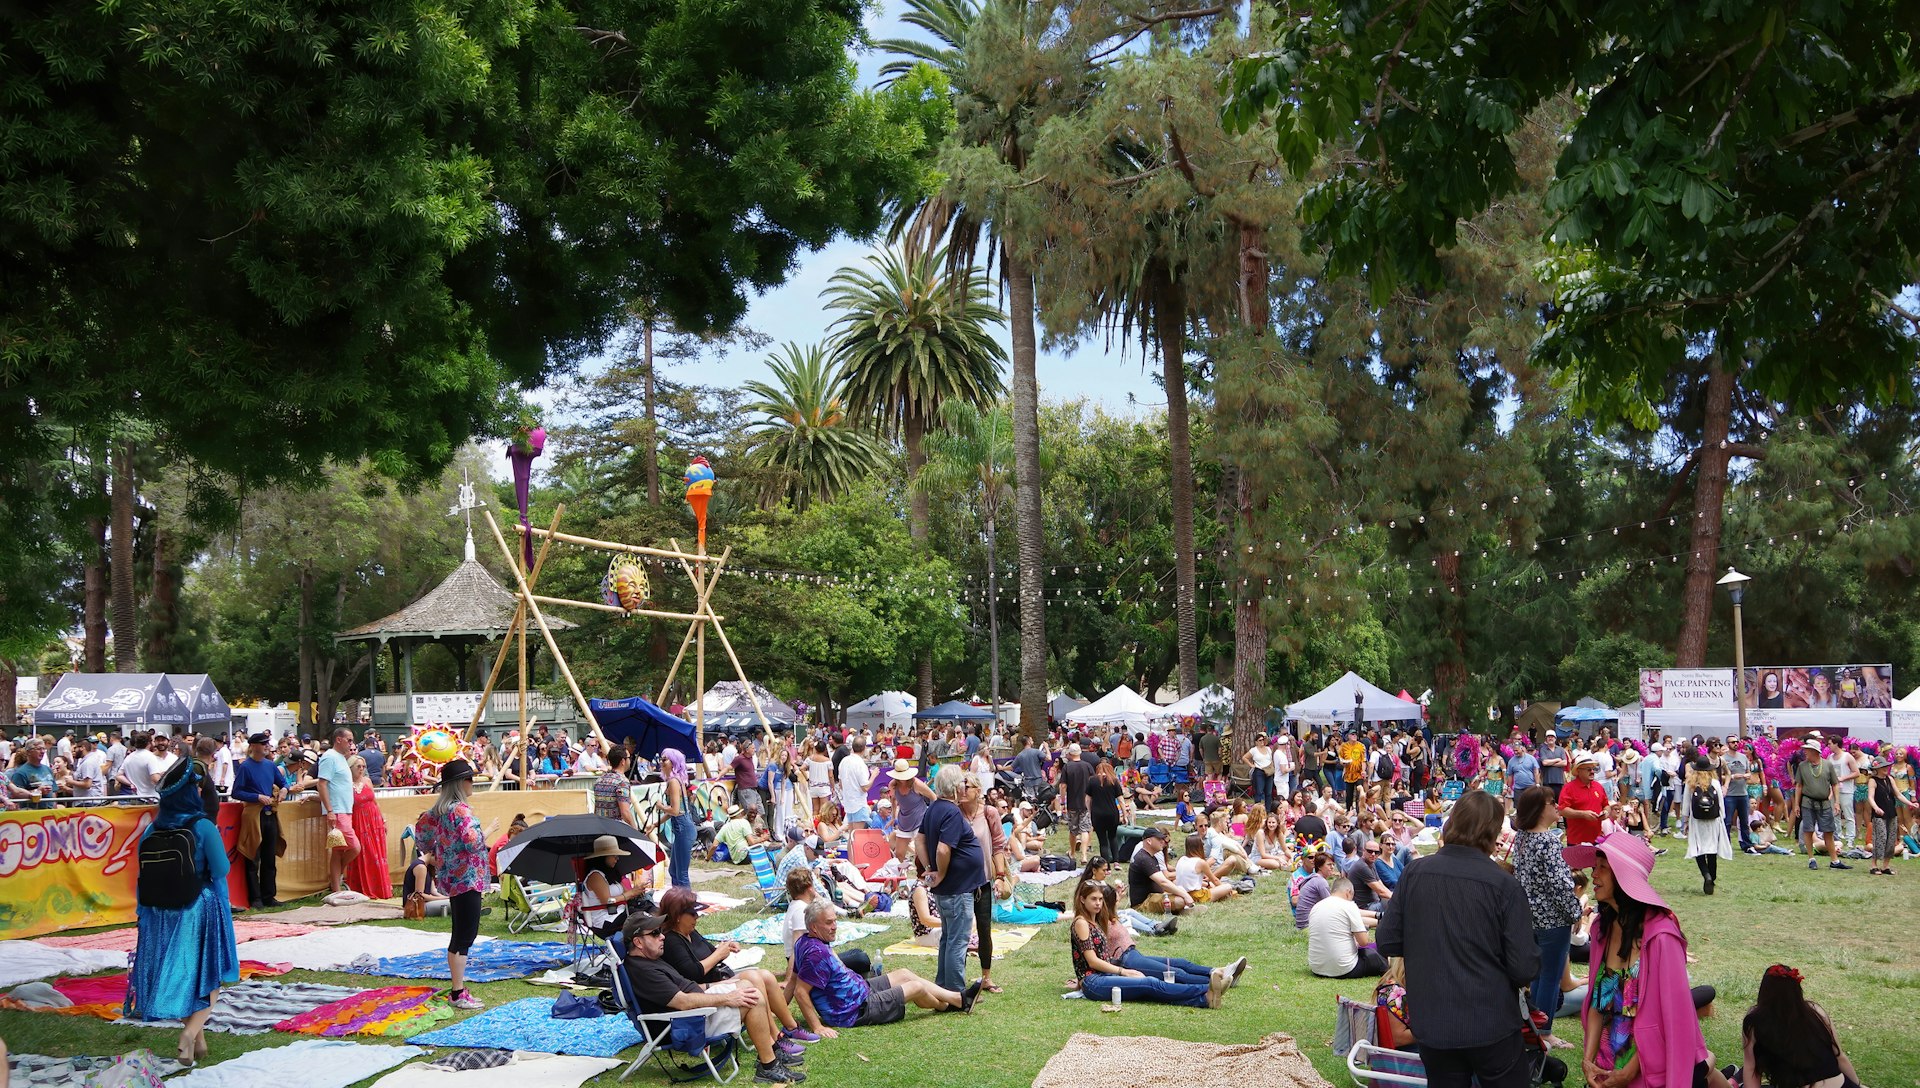 Lots of people gathered in groups, sitting on picnic blankets and relaxing at an outdoors event